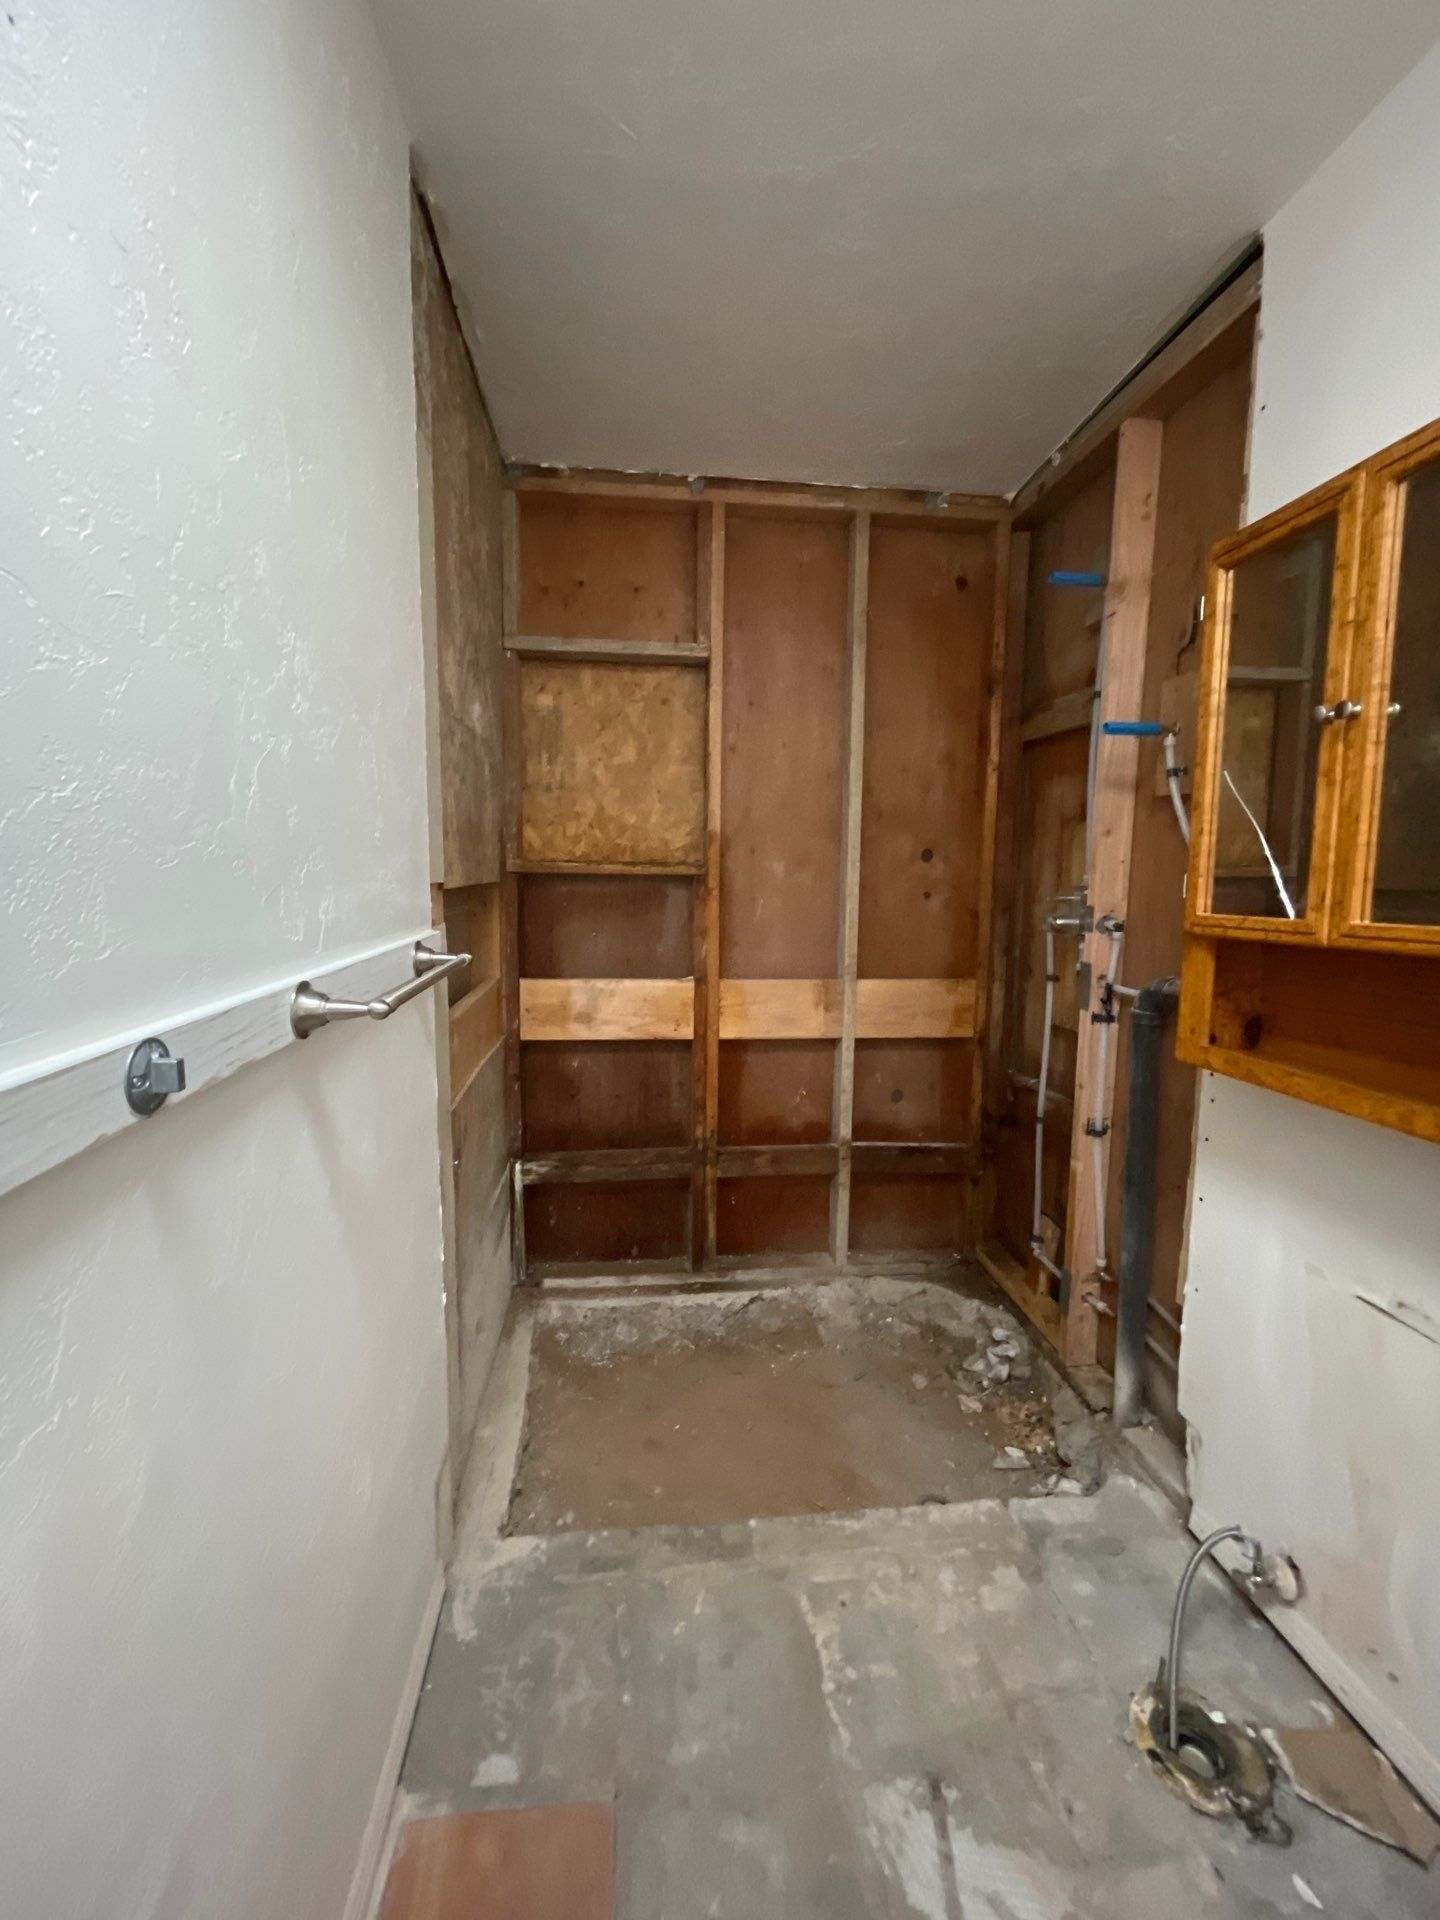 Mold was discovered during this bathroom remodel.